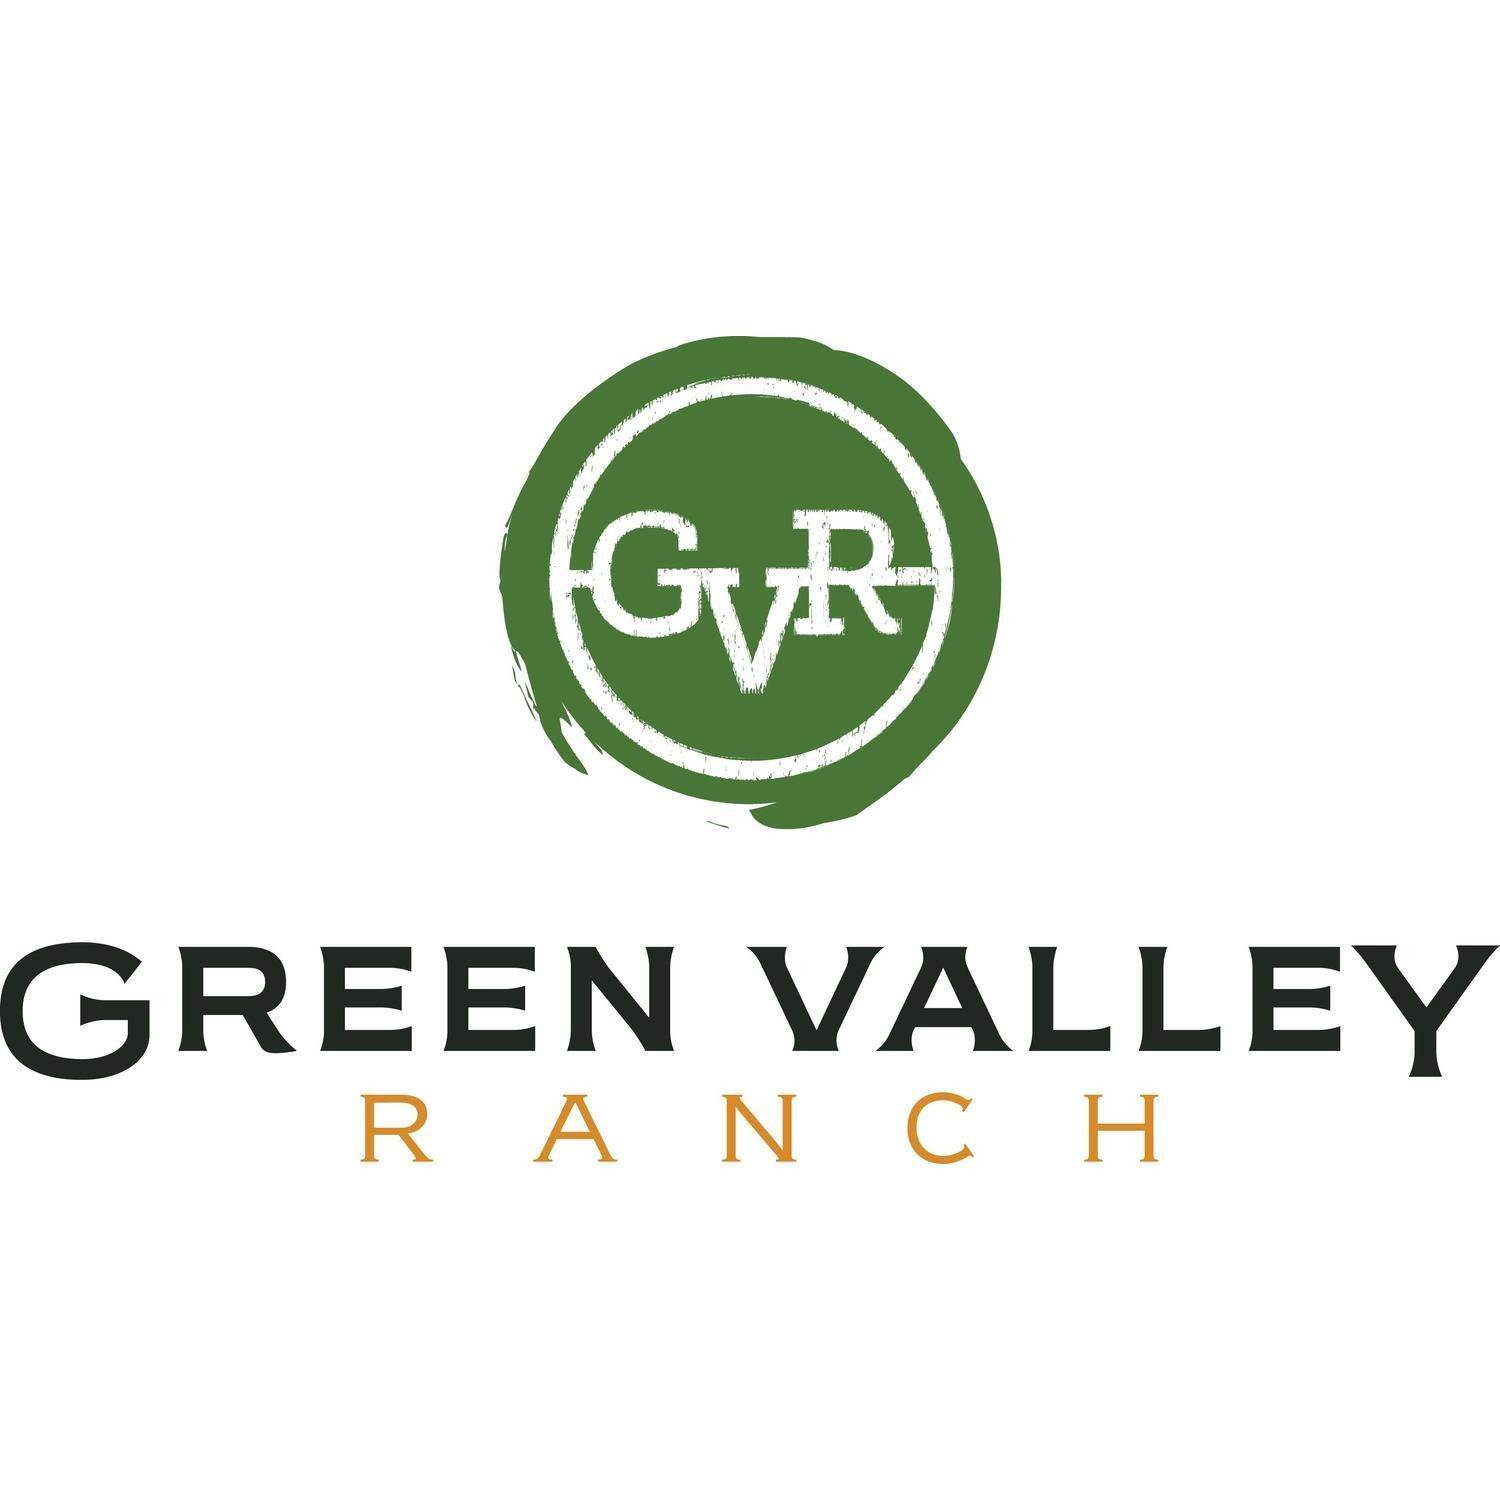 Green Valley Ranch xây dựng tại 21880 E. 46th Place, Aurora, CO 80019